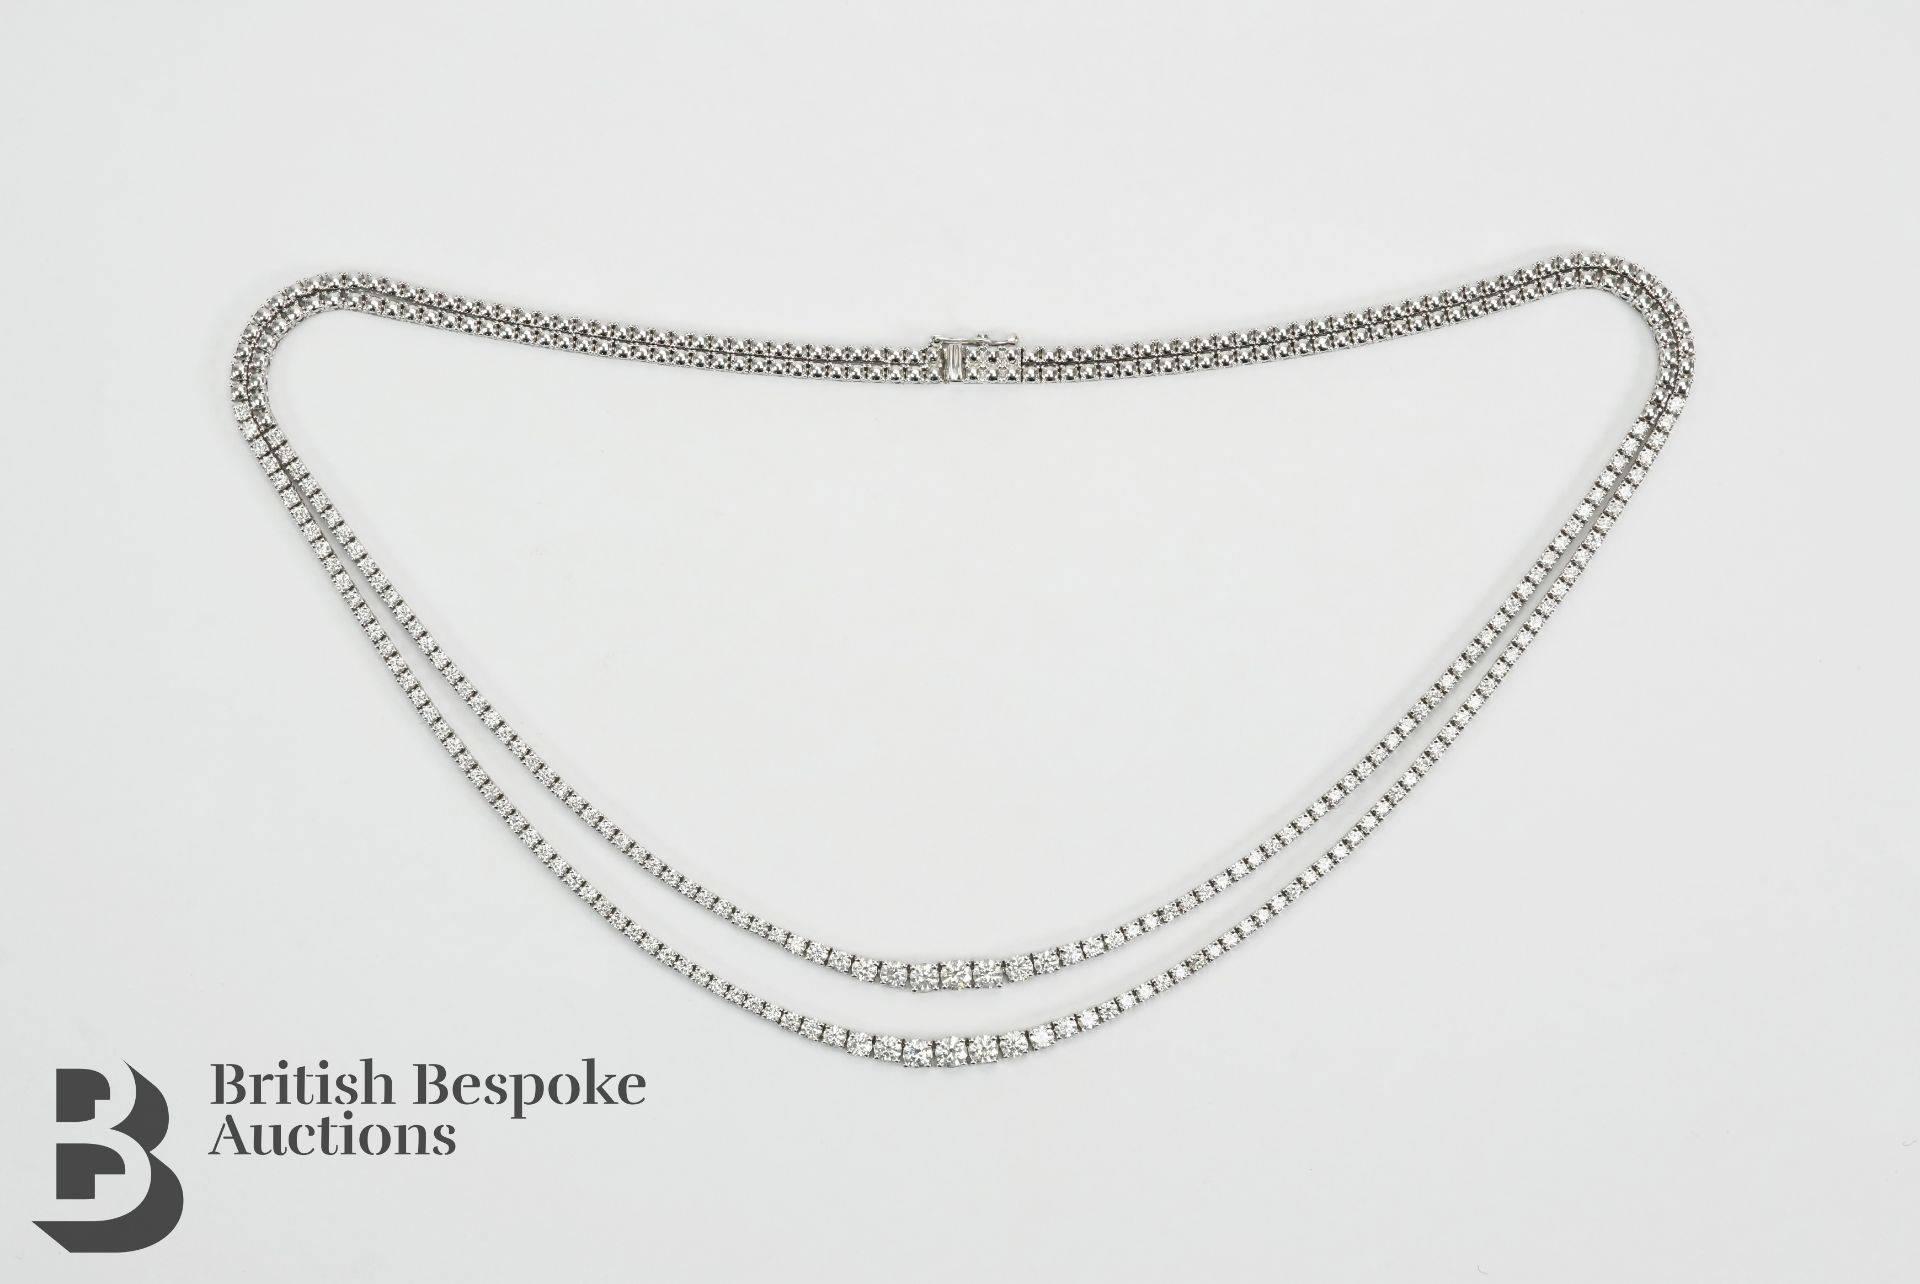 18ct White Gold 7.4ct Diamond Double Strand Necklace - Image 3 of 9